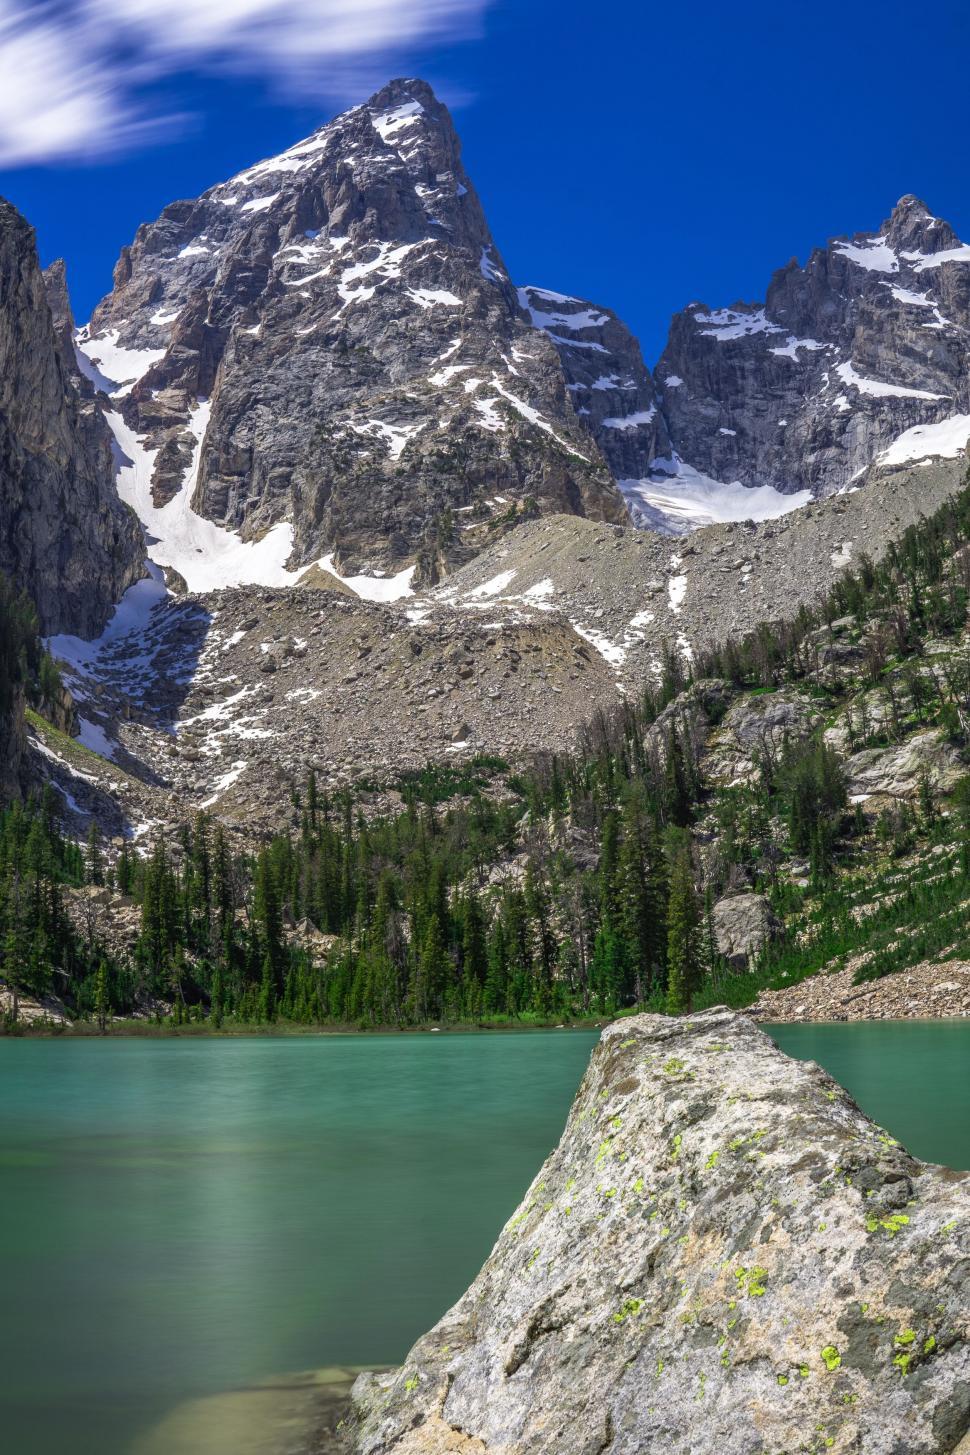 Free Image of Snow mountains and Lake  